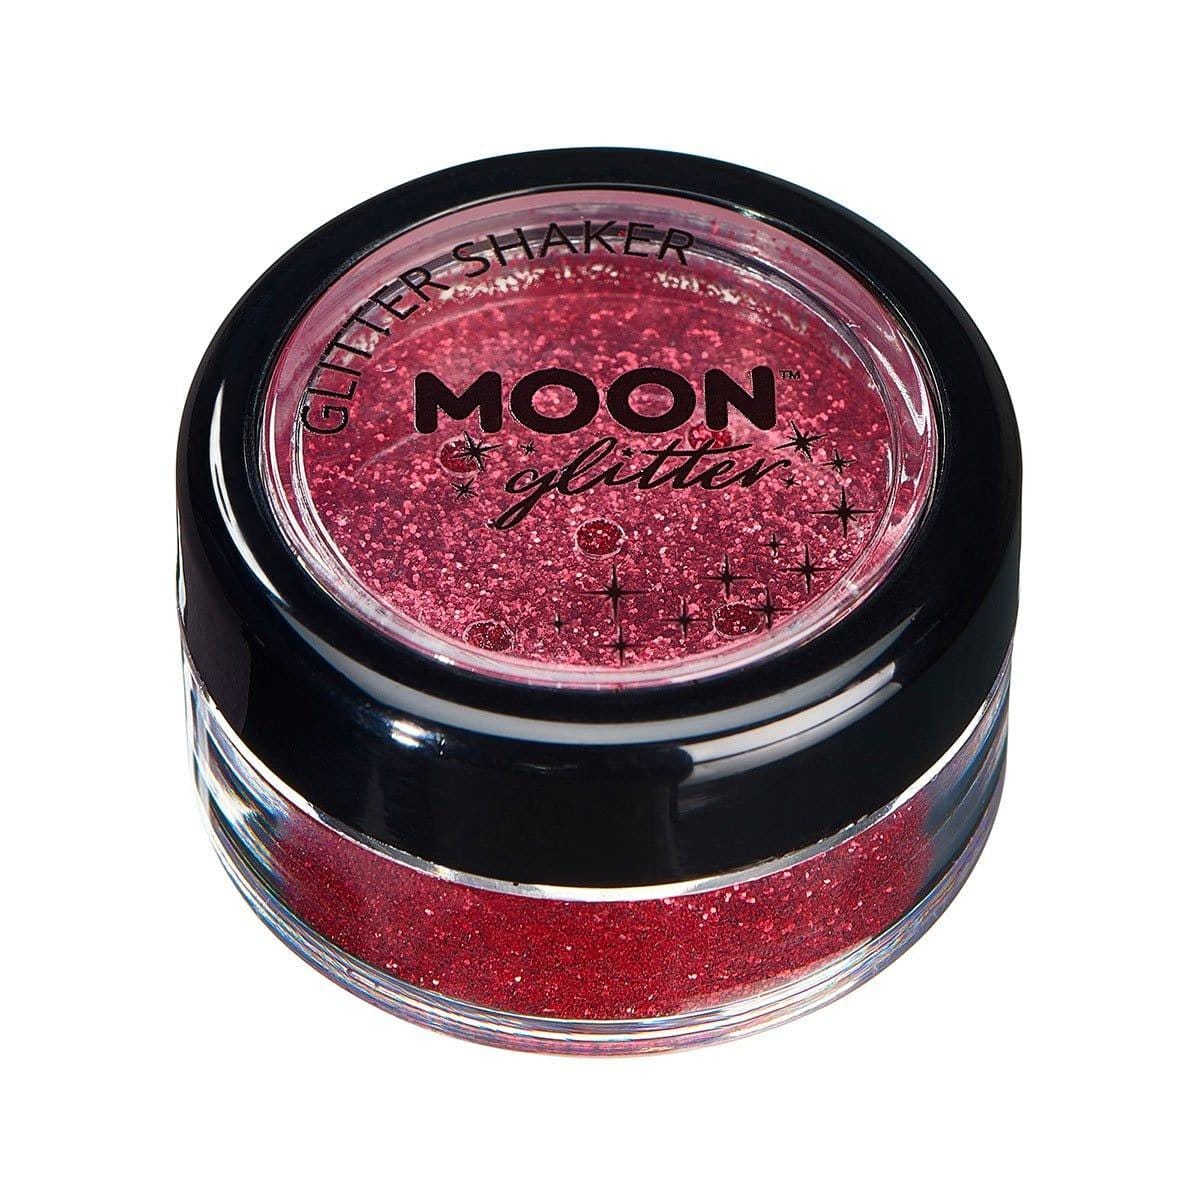 Buy Costume Accessories Moon red fine glitter sold at Party Expert